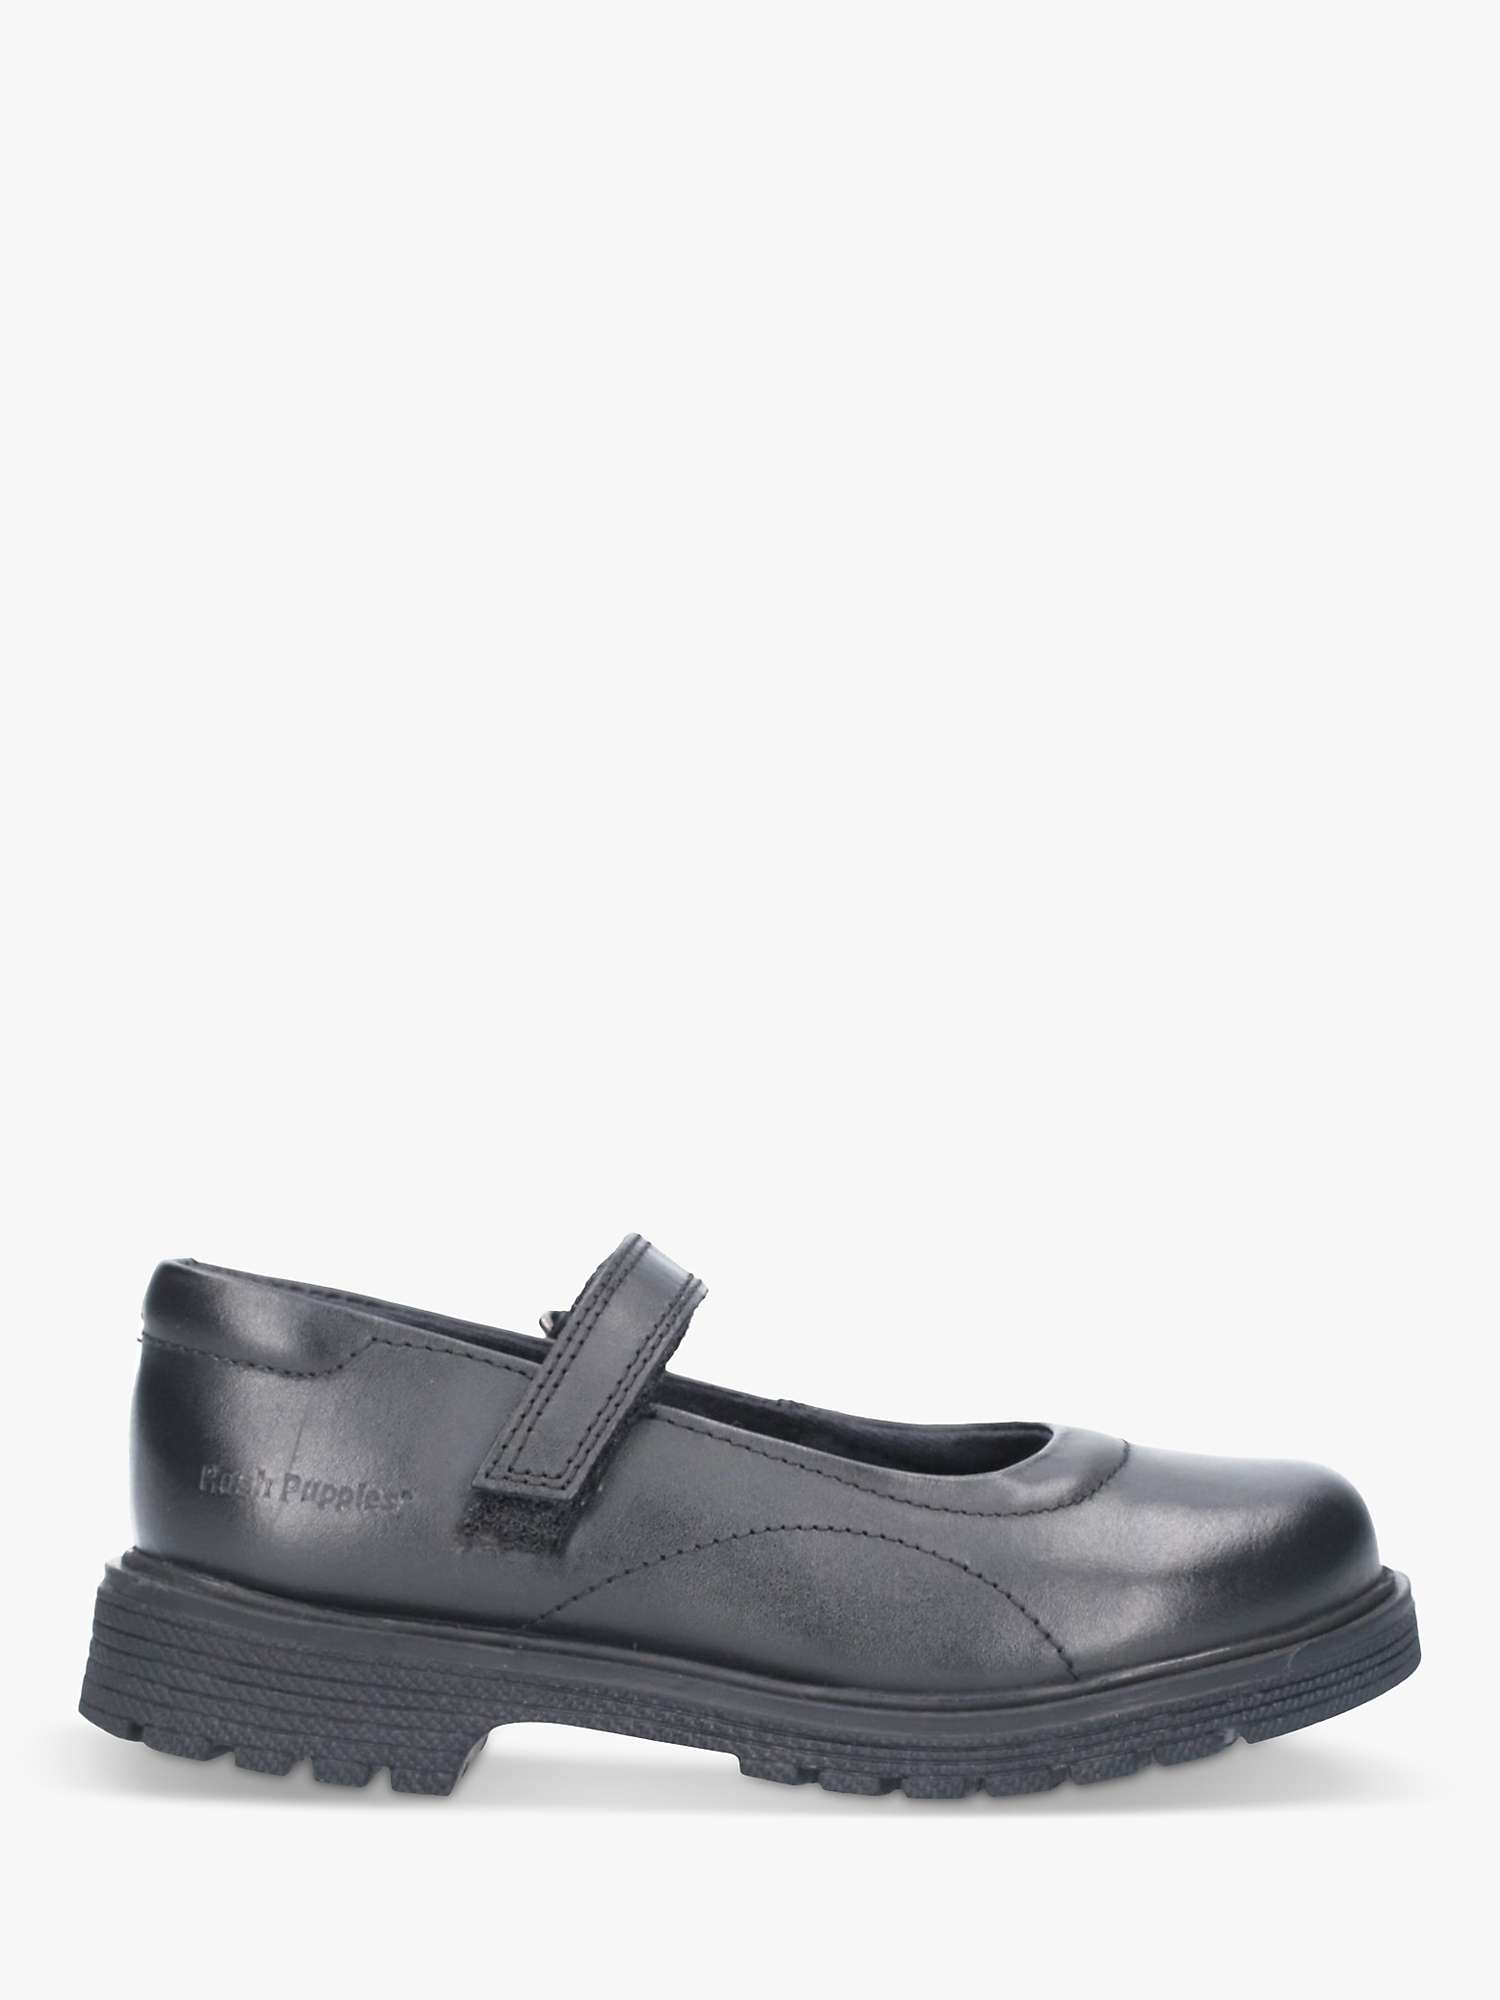 Buy Hush Puppies Kids' Tally Leather Mary Jane Shoes, Black Online at johnlewis.com